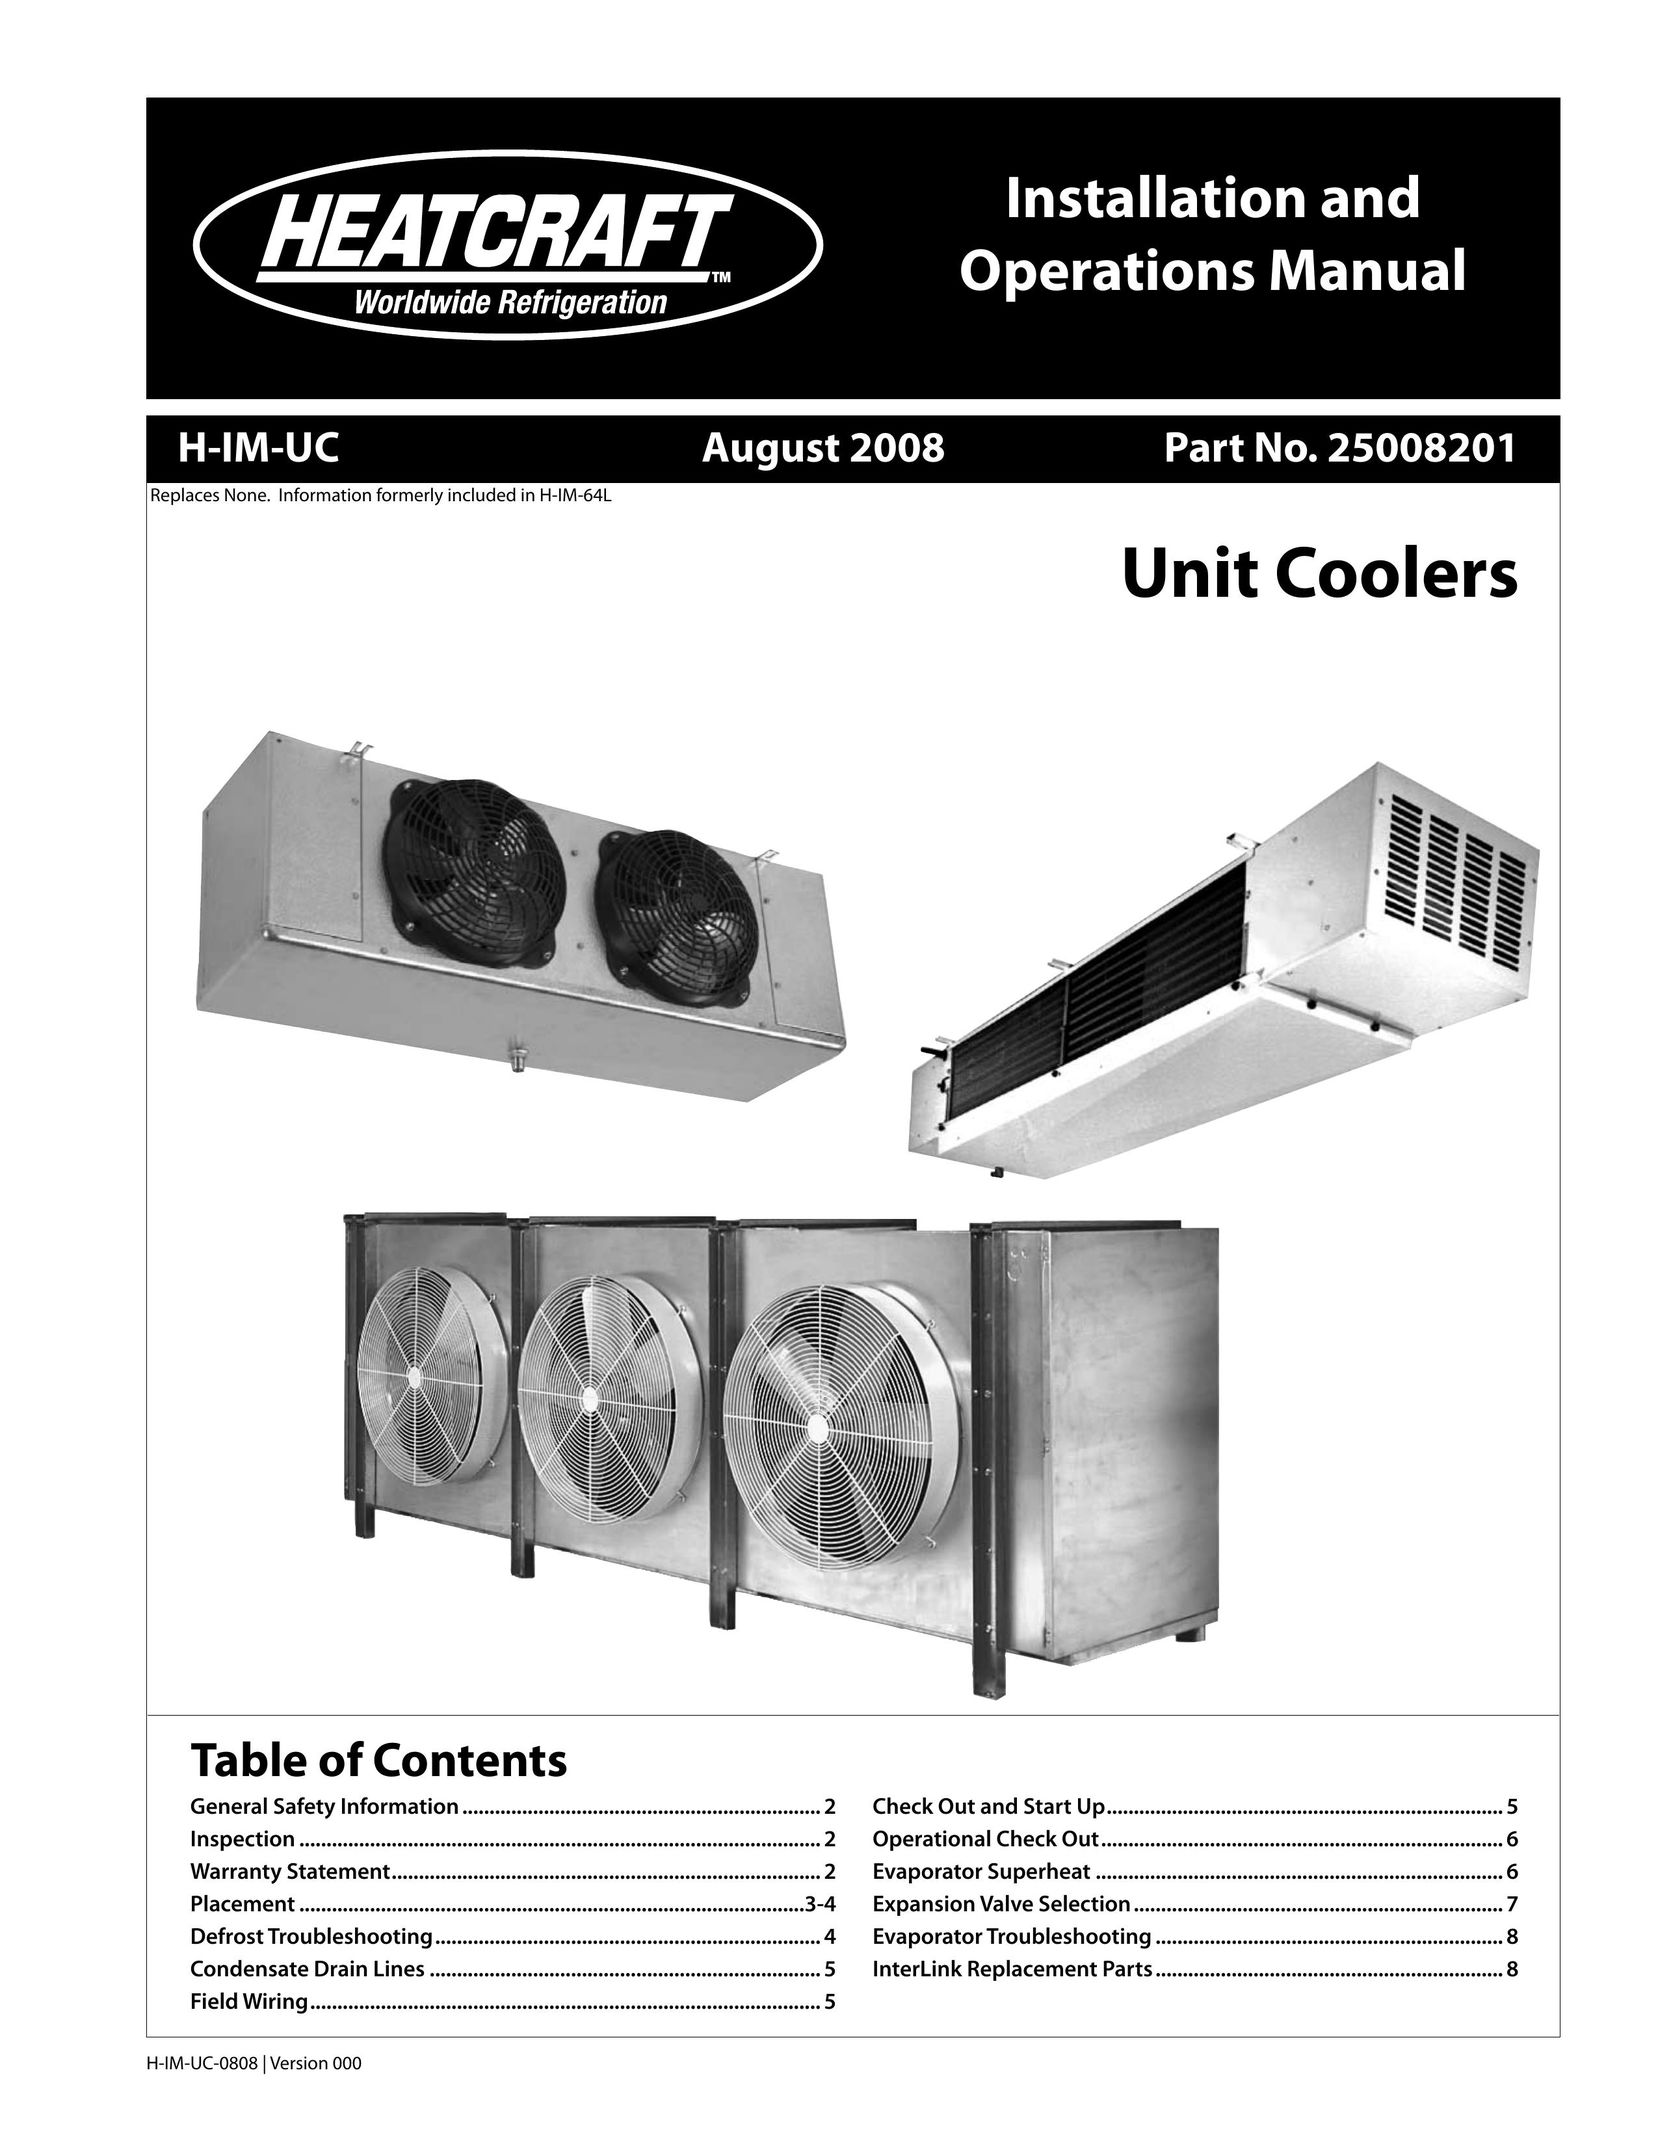 Heatcraft Refrigeration Products H-IM-UC Humidifier User Manual